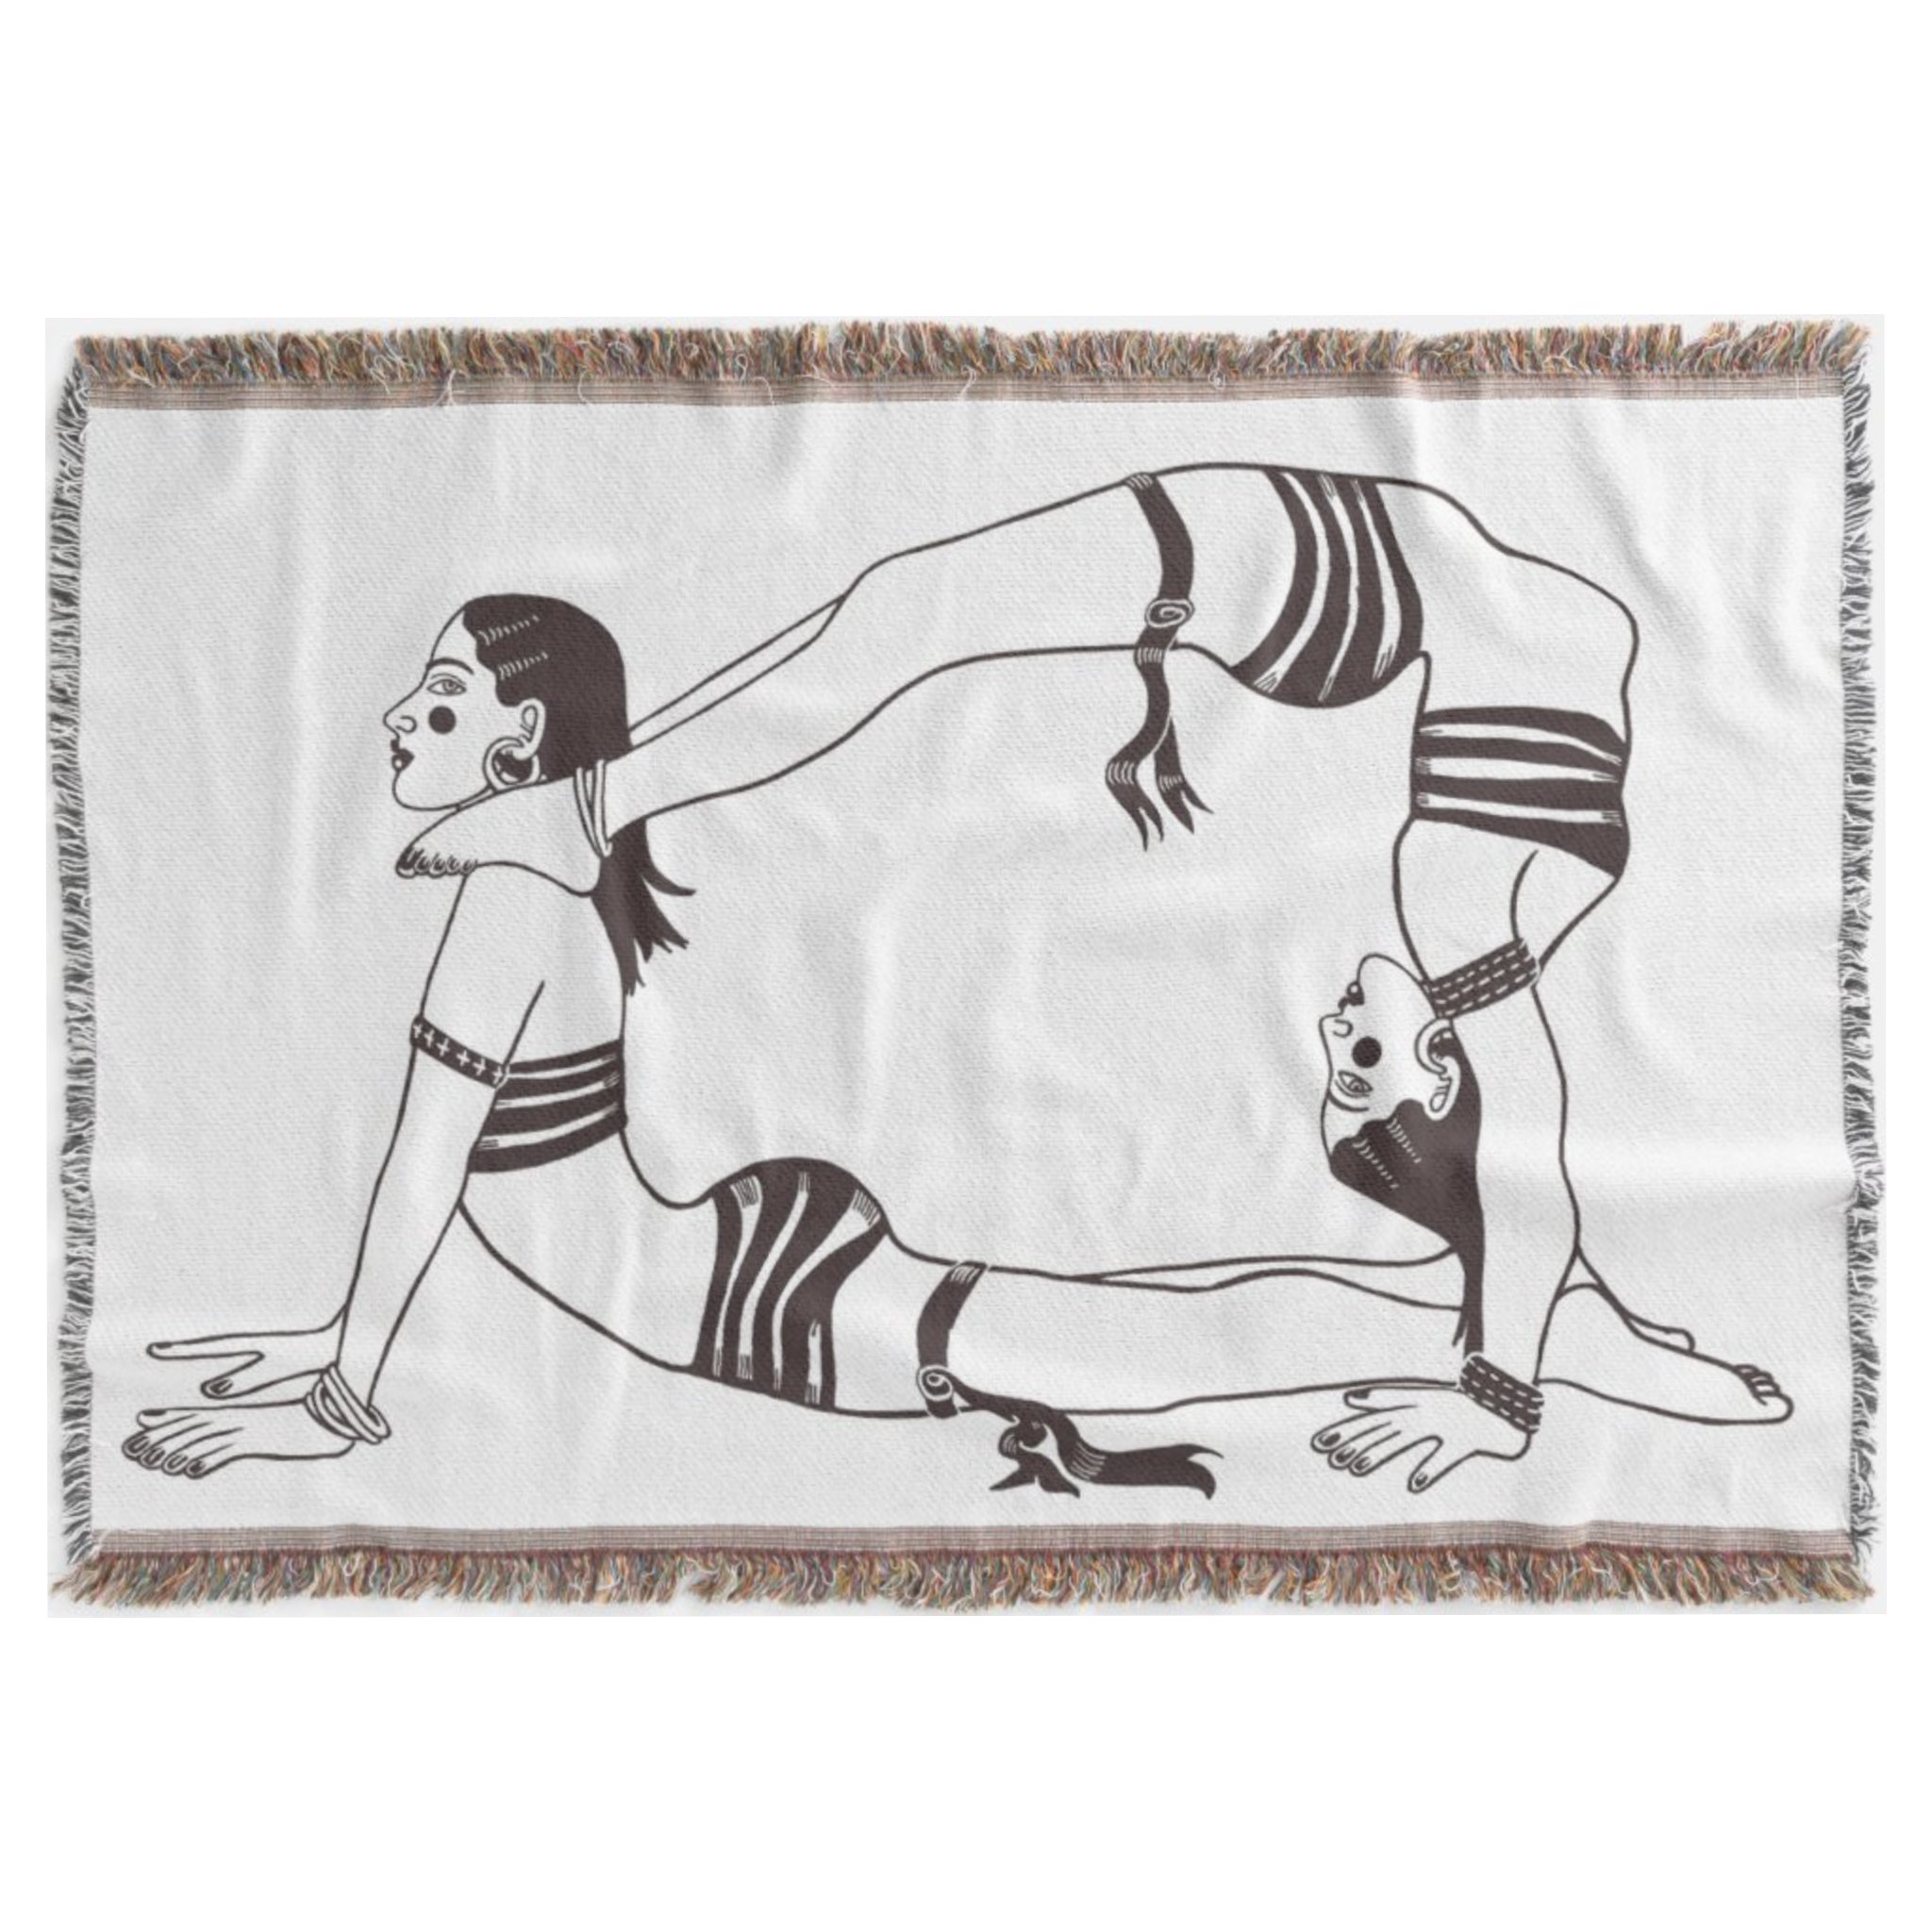 A large woven throw blanket with slightly fringed edges features a black-and-white illustration of two acrobatic women. One is on the floor in the upward facing dog yoga position and the other is above her, in an opposite position where her feet are resting on the women's shoulders, her torso is extended, and her hands are on the floor so she is in an elegant backbend position. Both wear small bikini tops and bottoms.